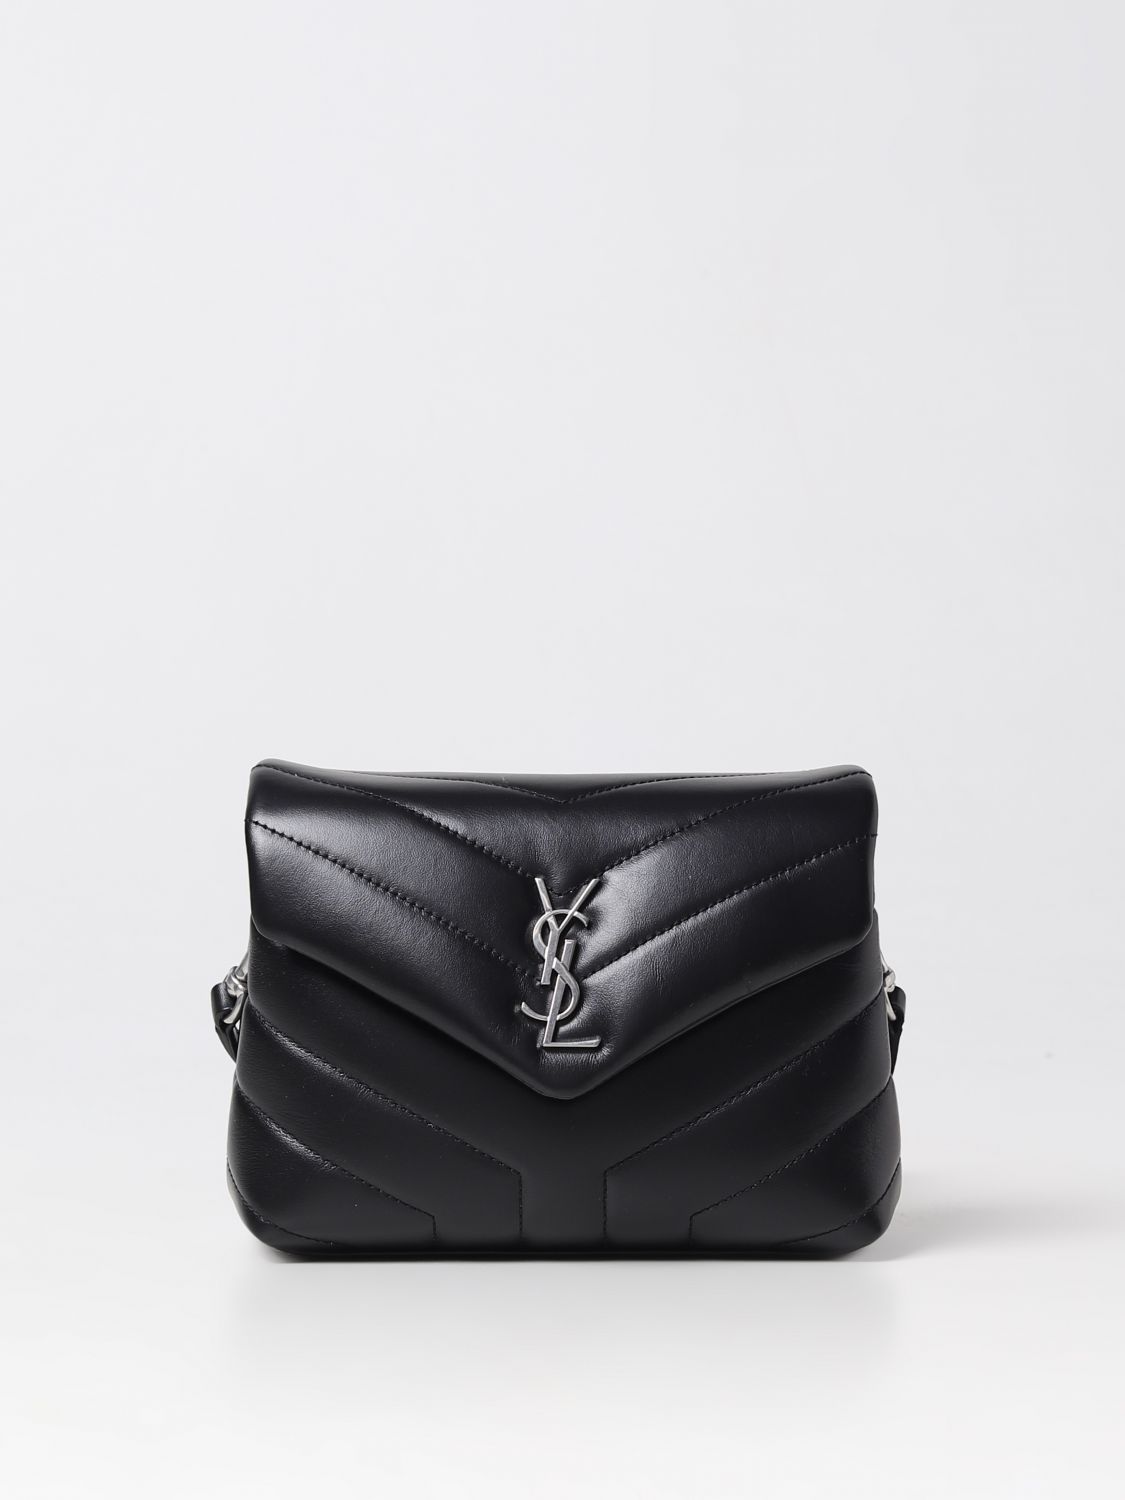 Ready stock! YSL outlet sale!!! Sept clutch